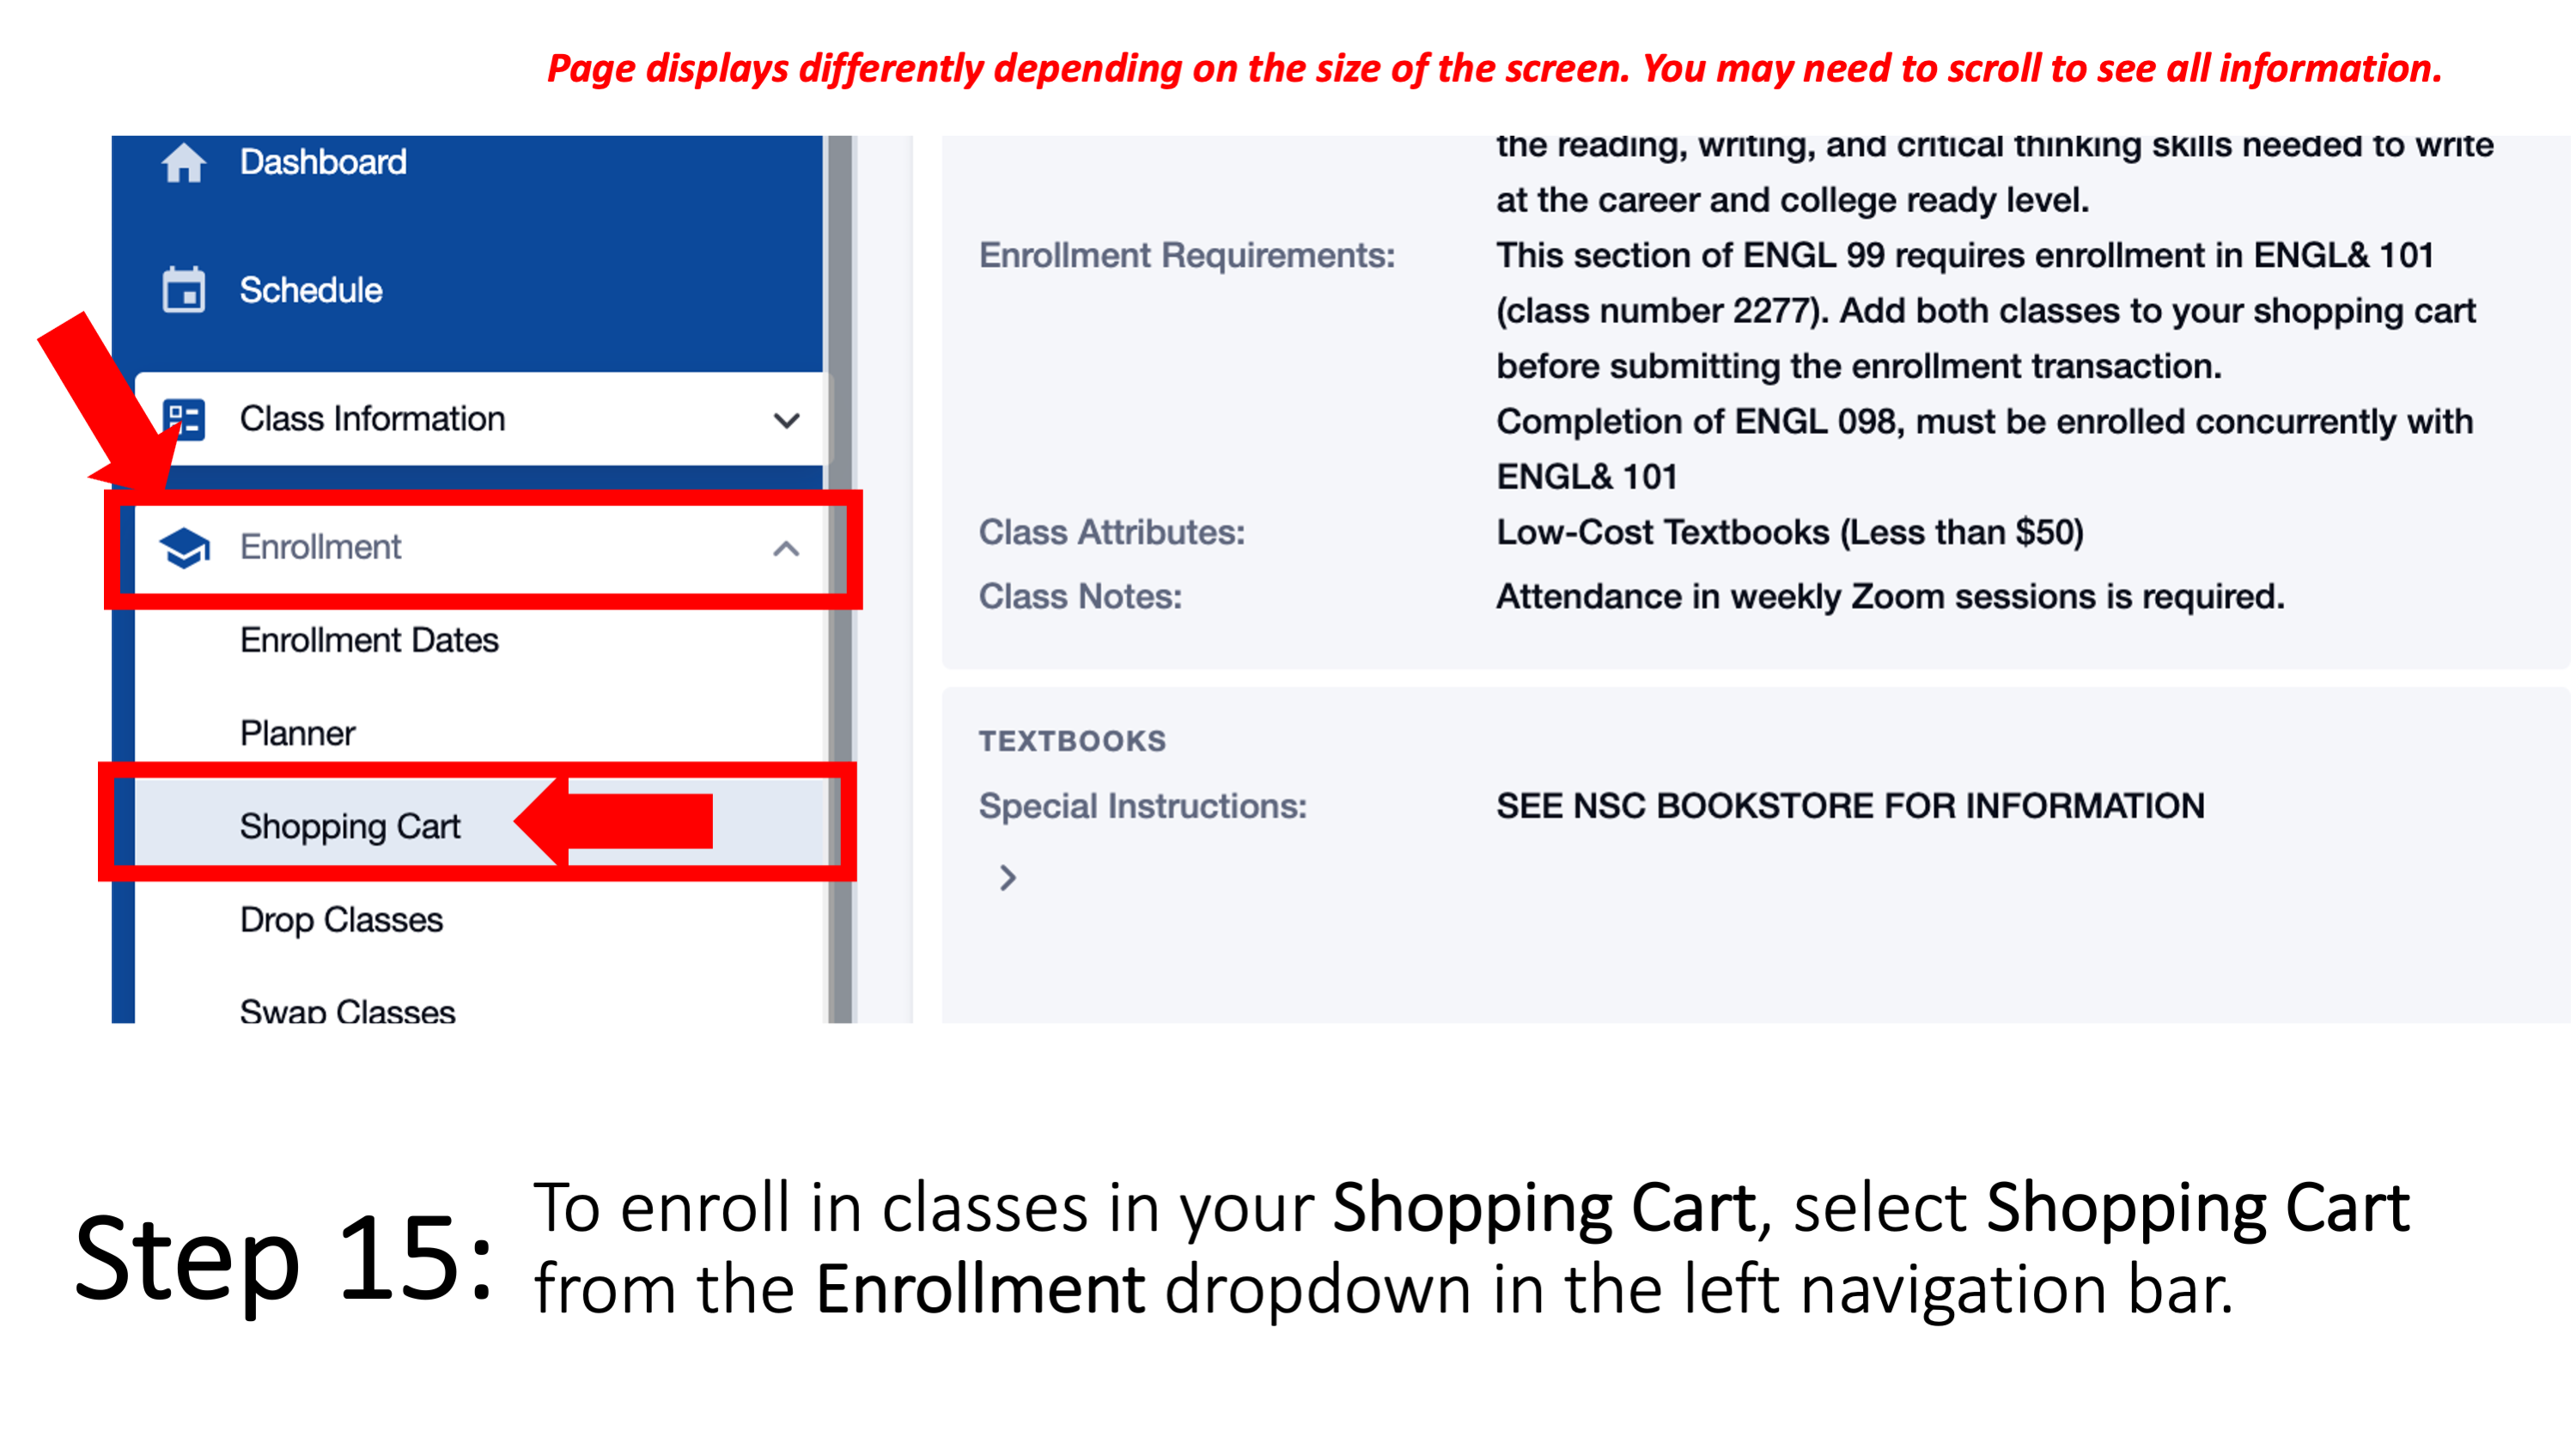 Step 15: To enroll in classes in your Shopping Cart, select Shopping Cart from the Enrollment dropdown in the left navigation bar. Page displays differently depending on the size of the screen. You may need to scroll to see all information.